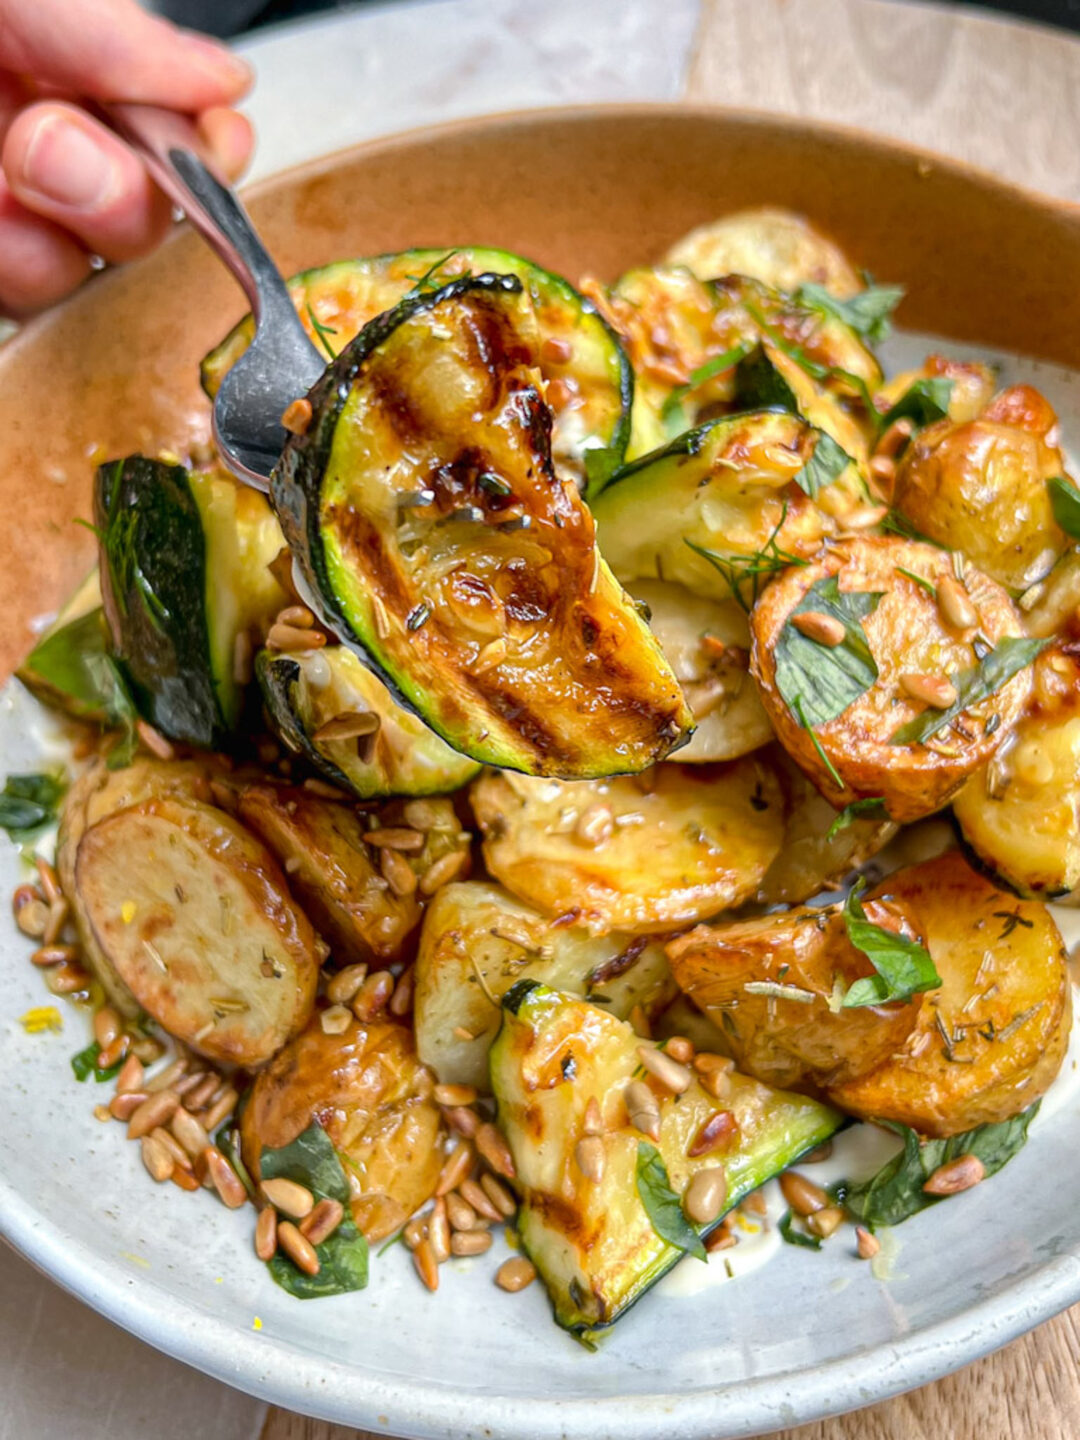 grilled courgette and potato salad